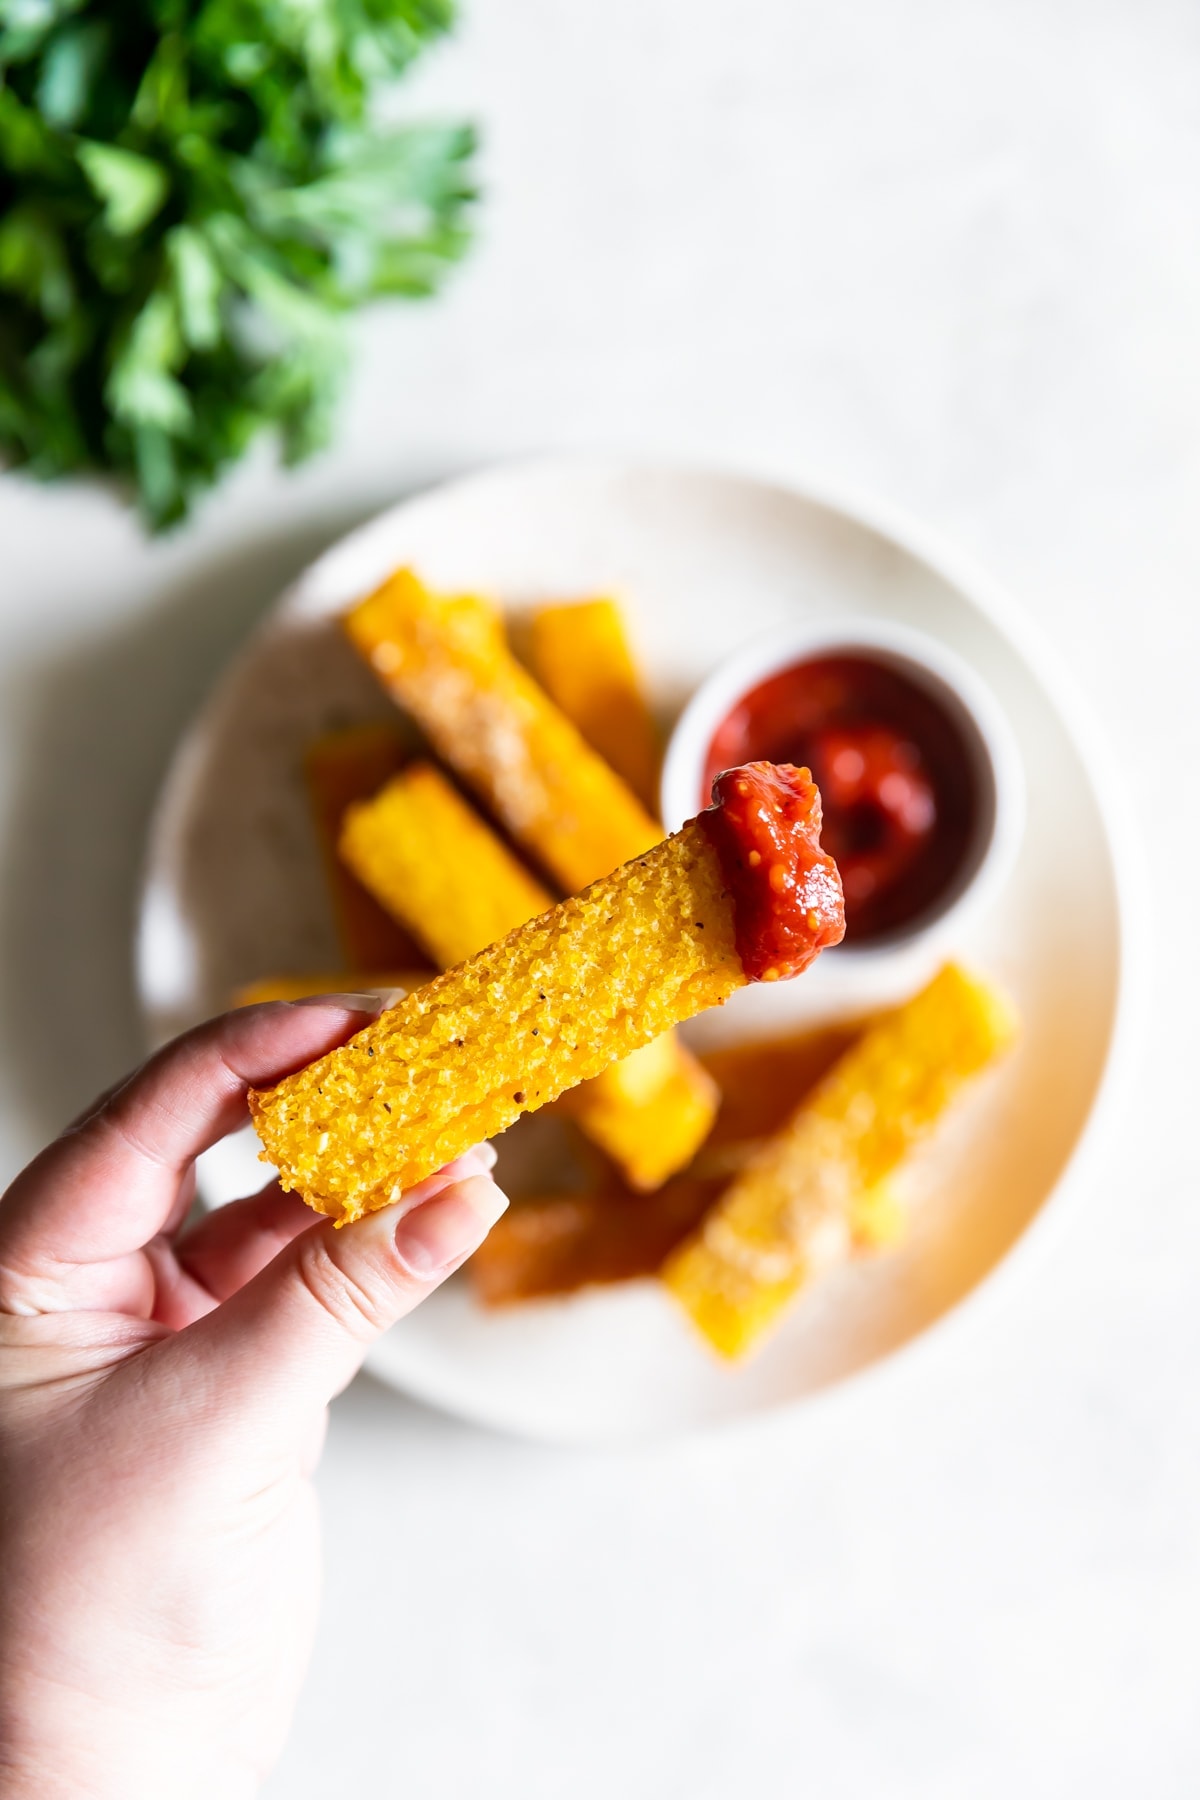 one polenta fry with spicy ketchup dipped on it